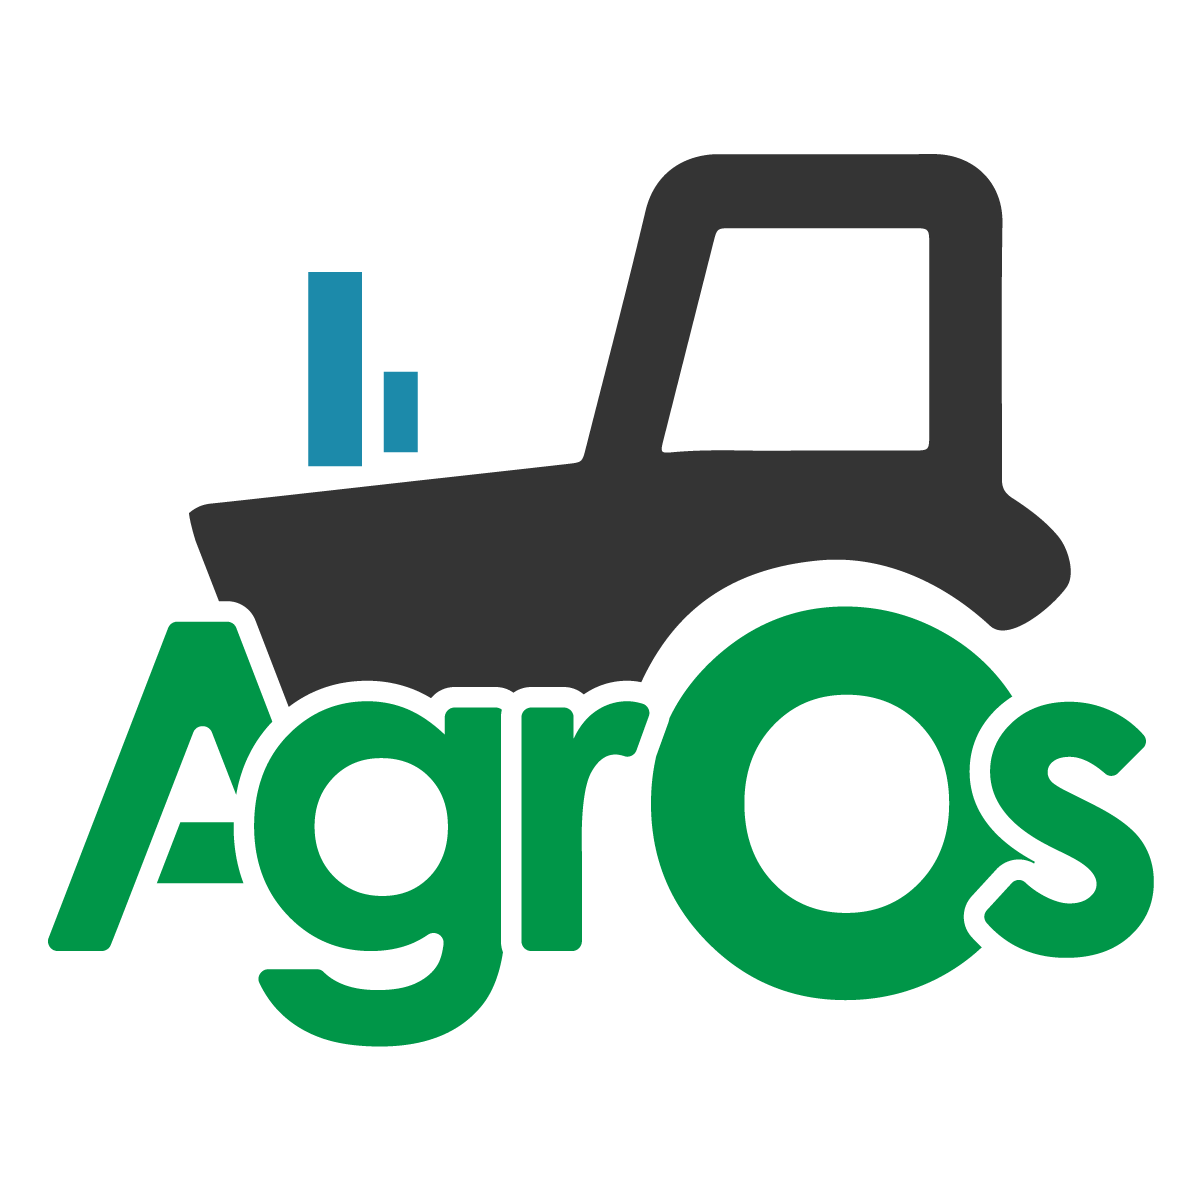 Software gestionale per Aziende Agricole - Agros